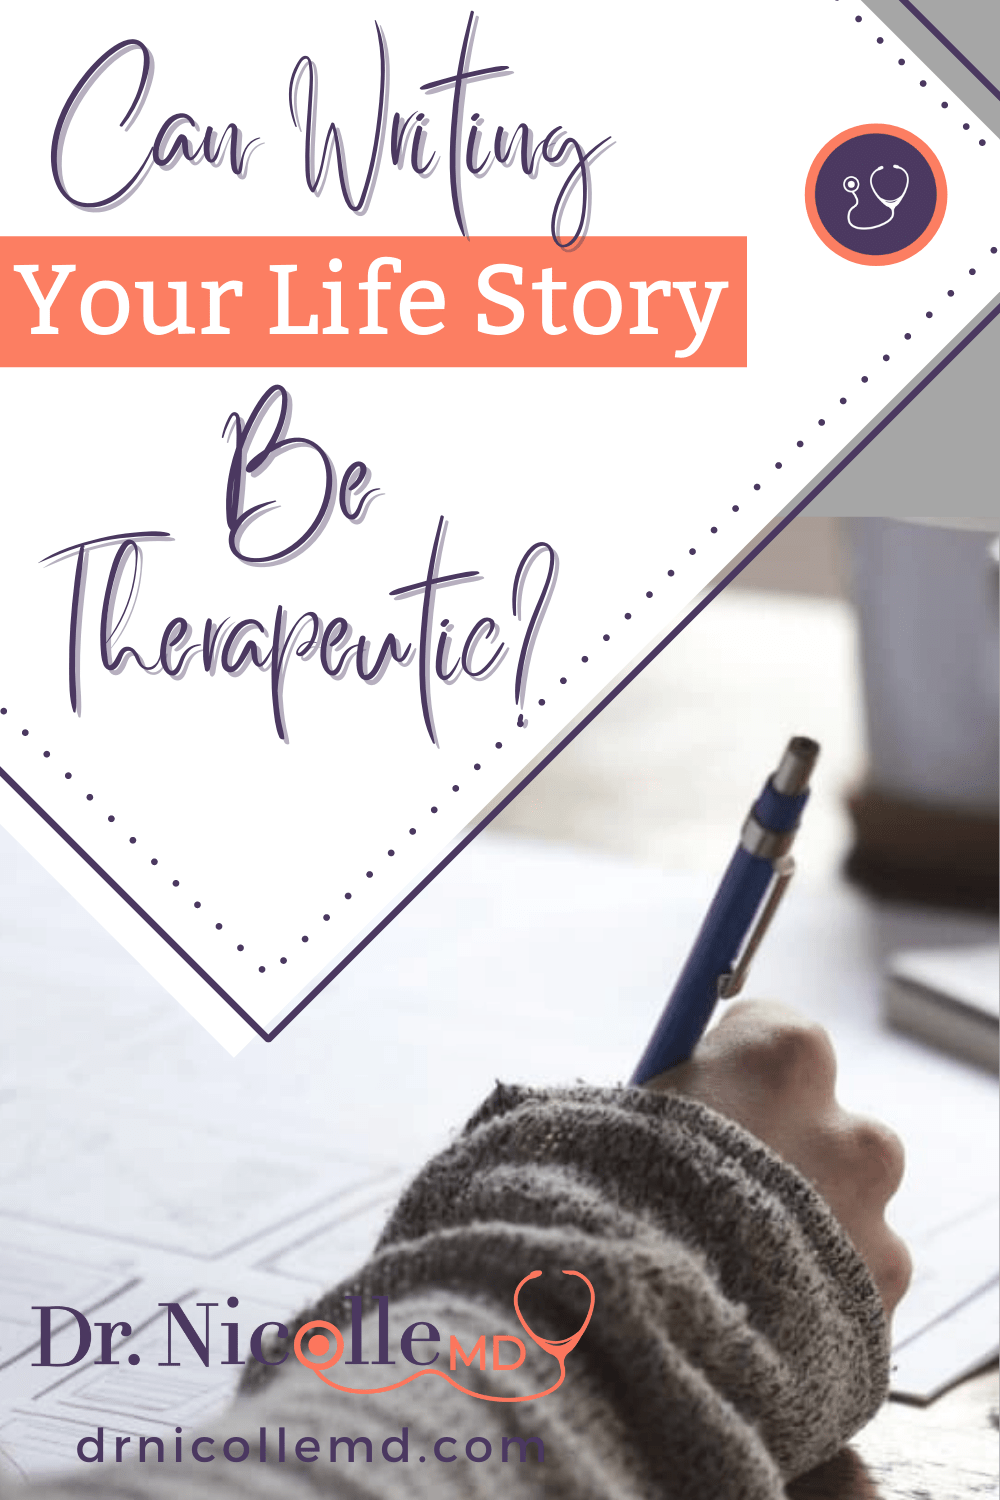 Can Writing Your Life Story Be Therapeutic?